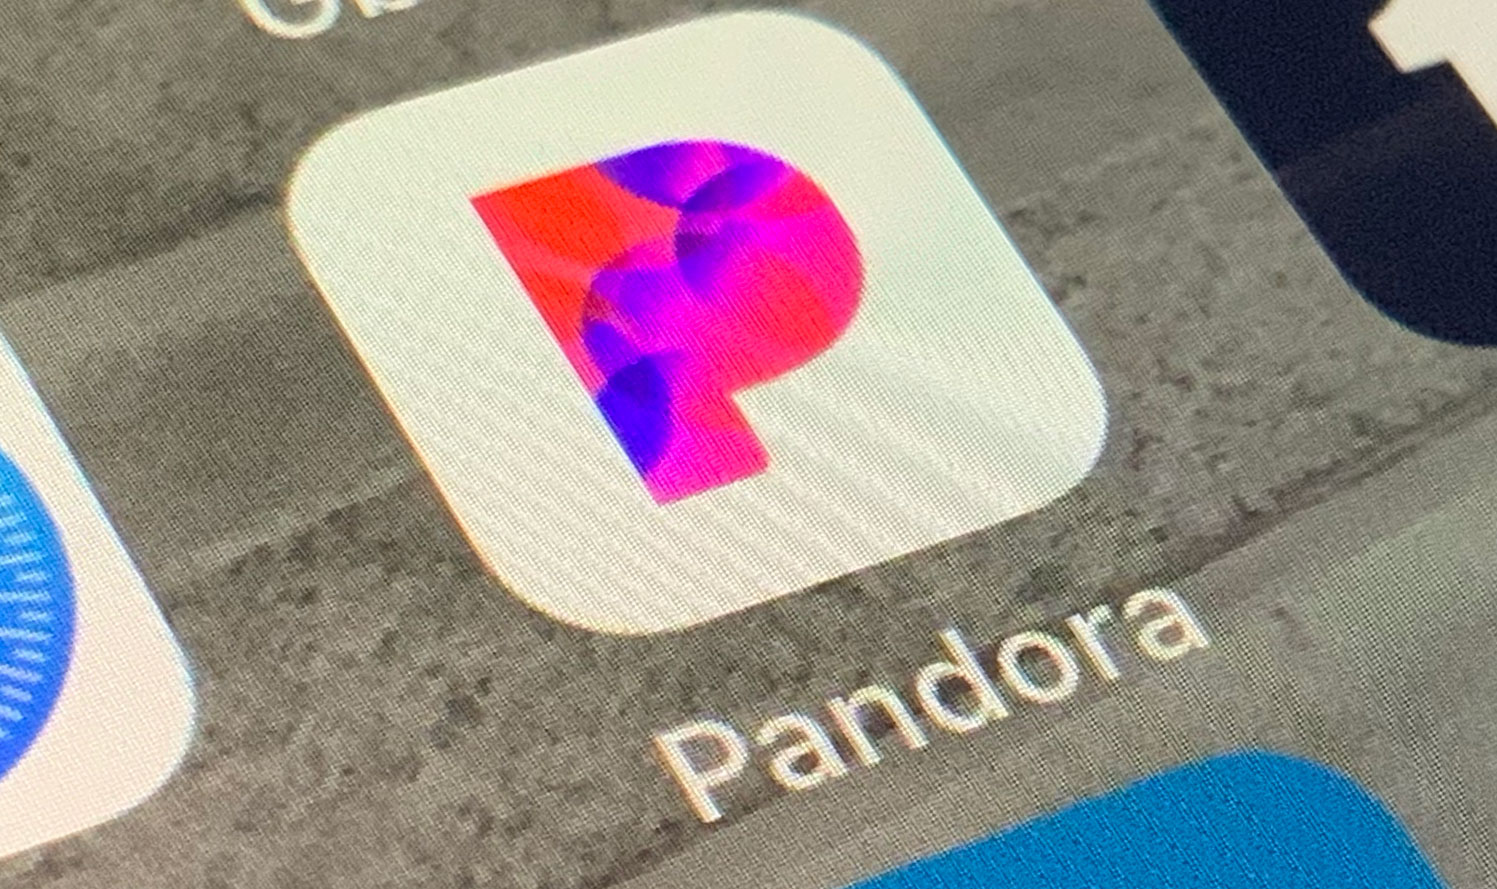 Pandora puts its personalization powers to work in a revamped app ...